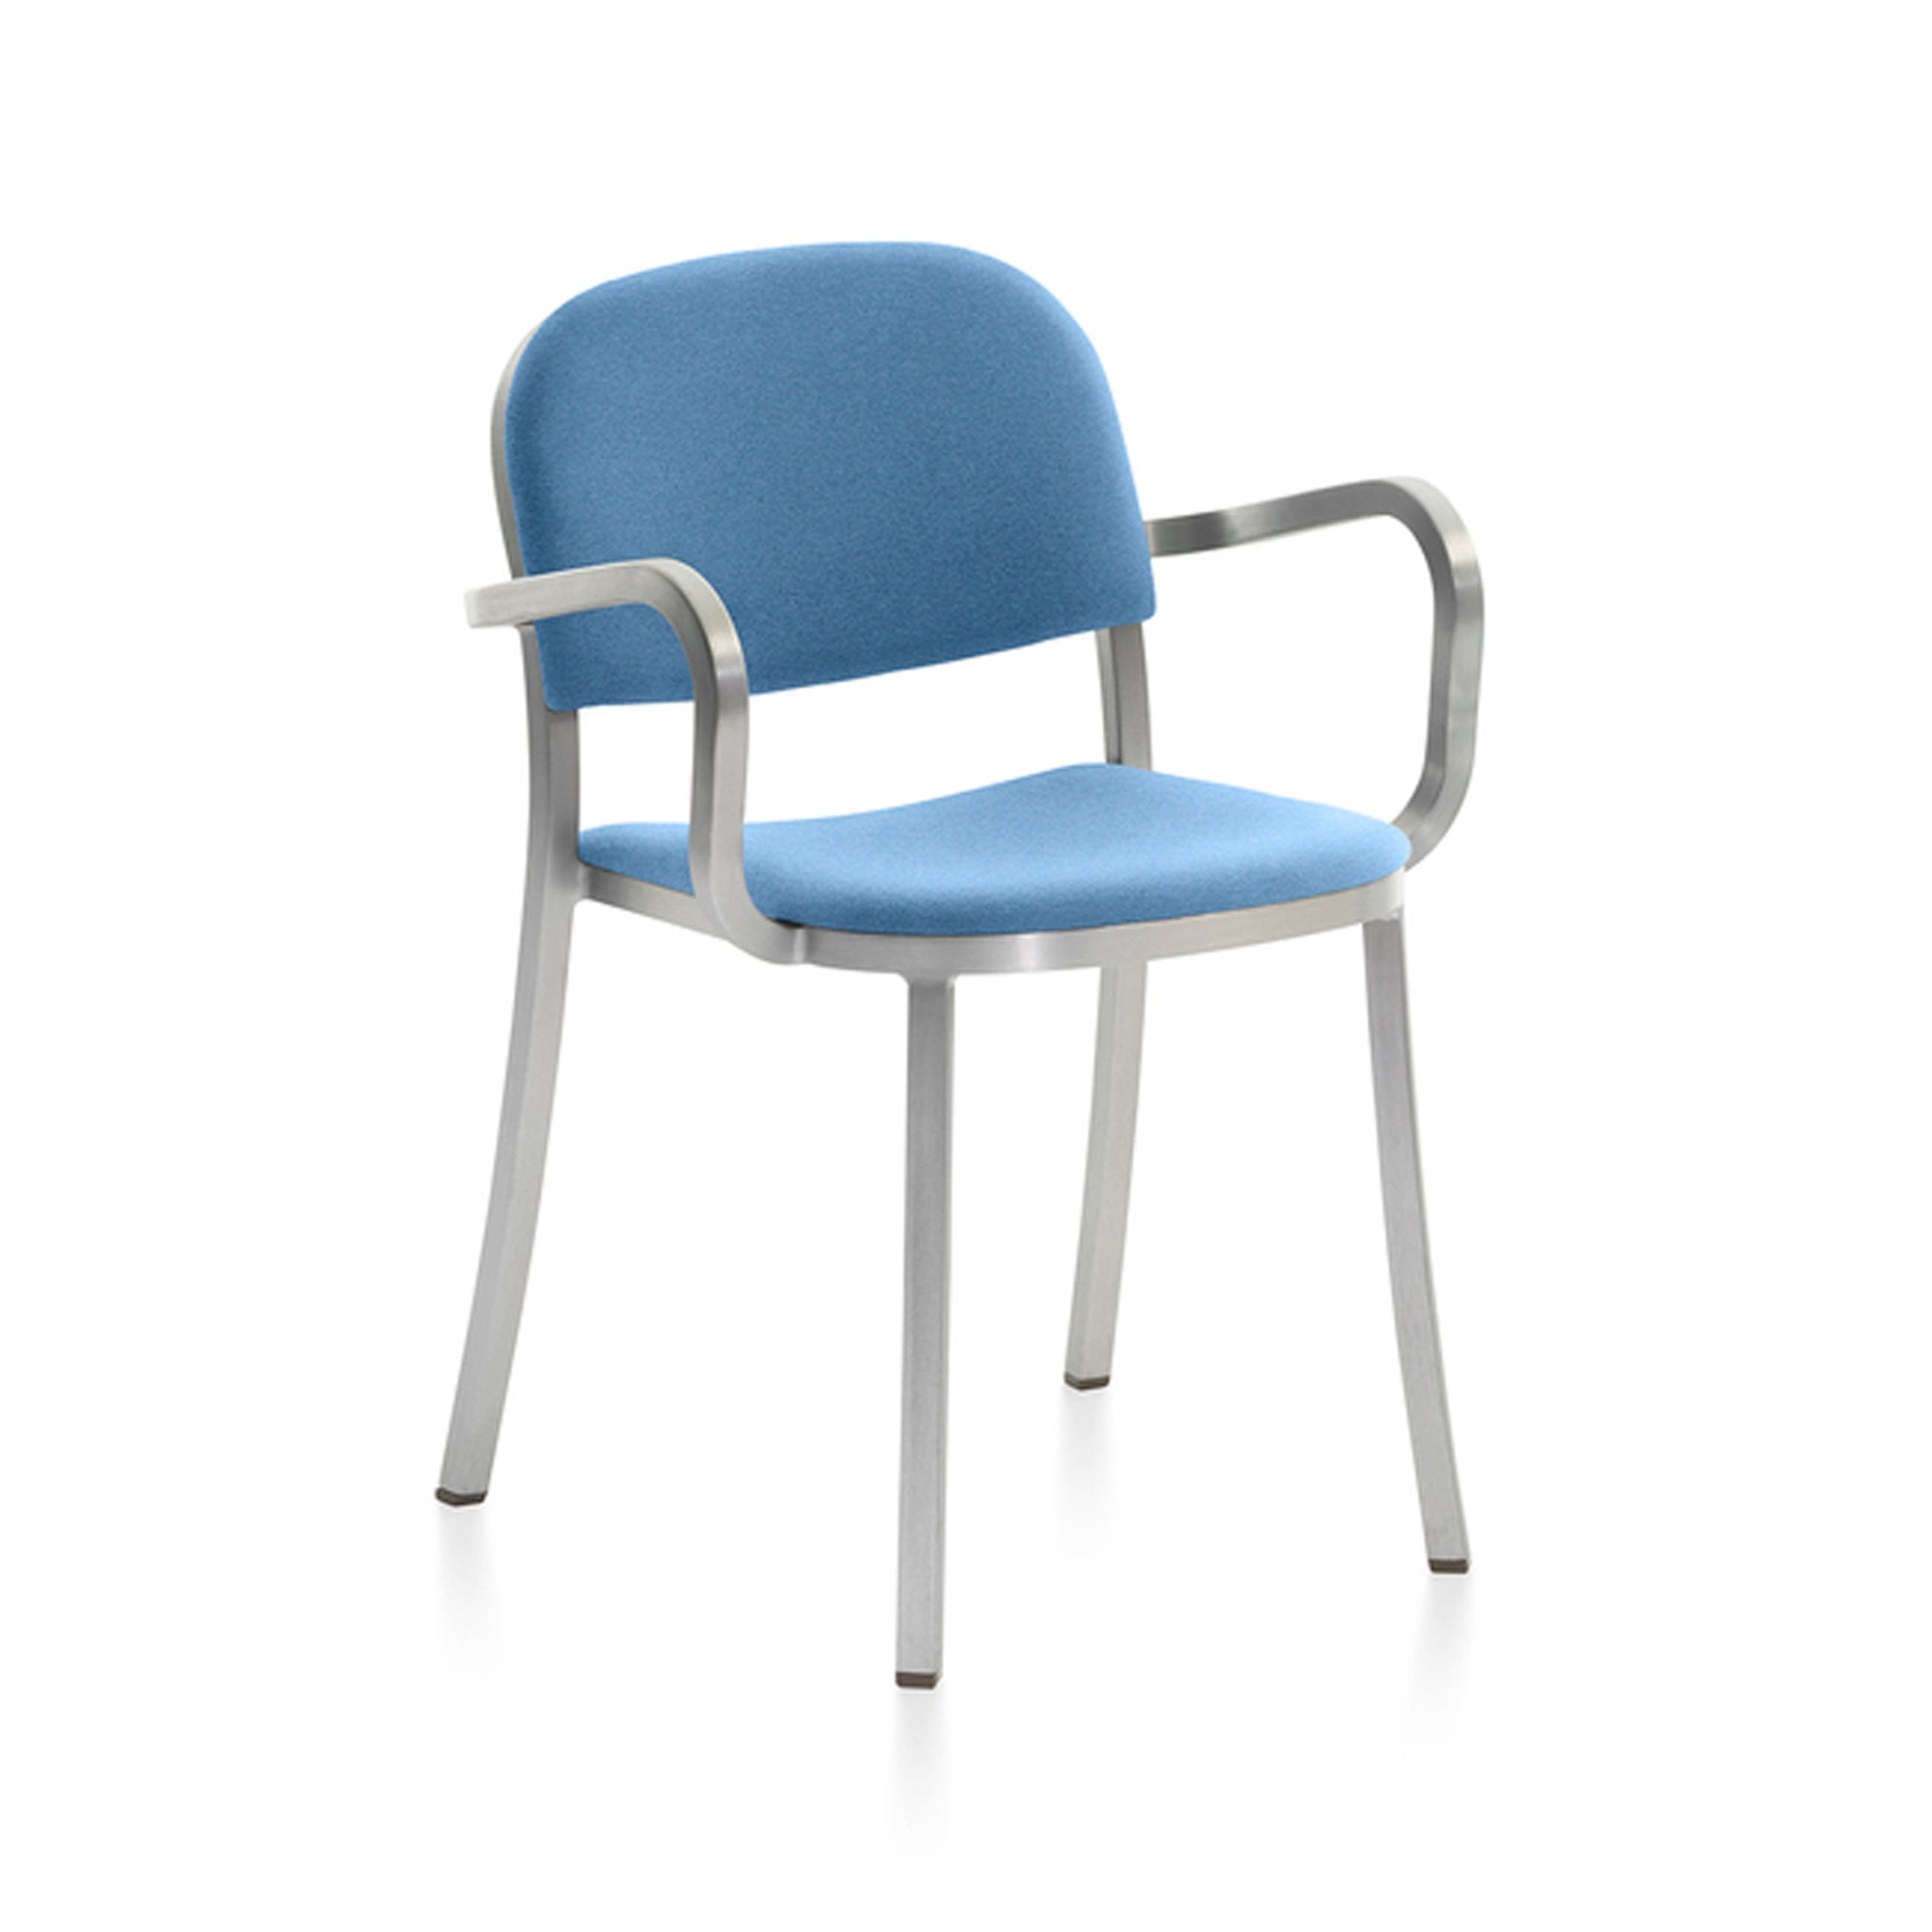 1 Inch Upholstered Chair